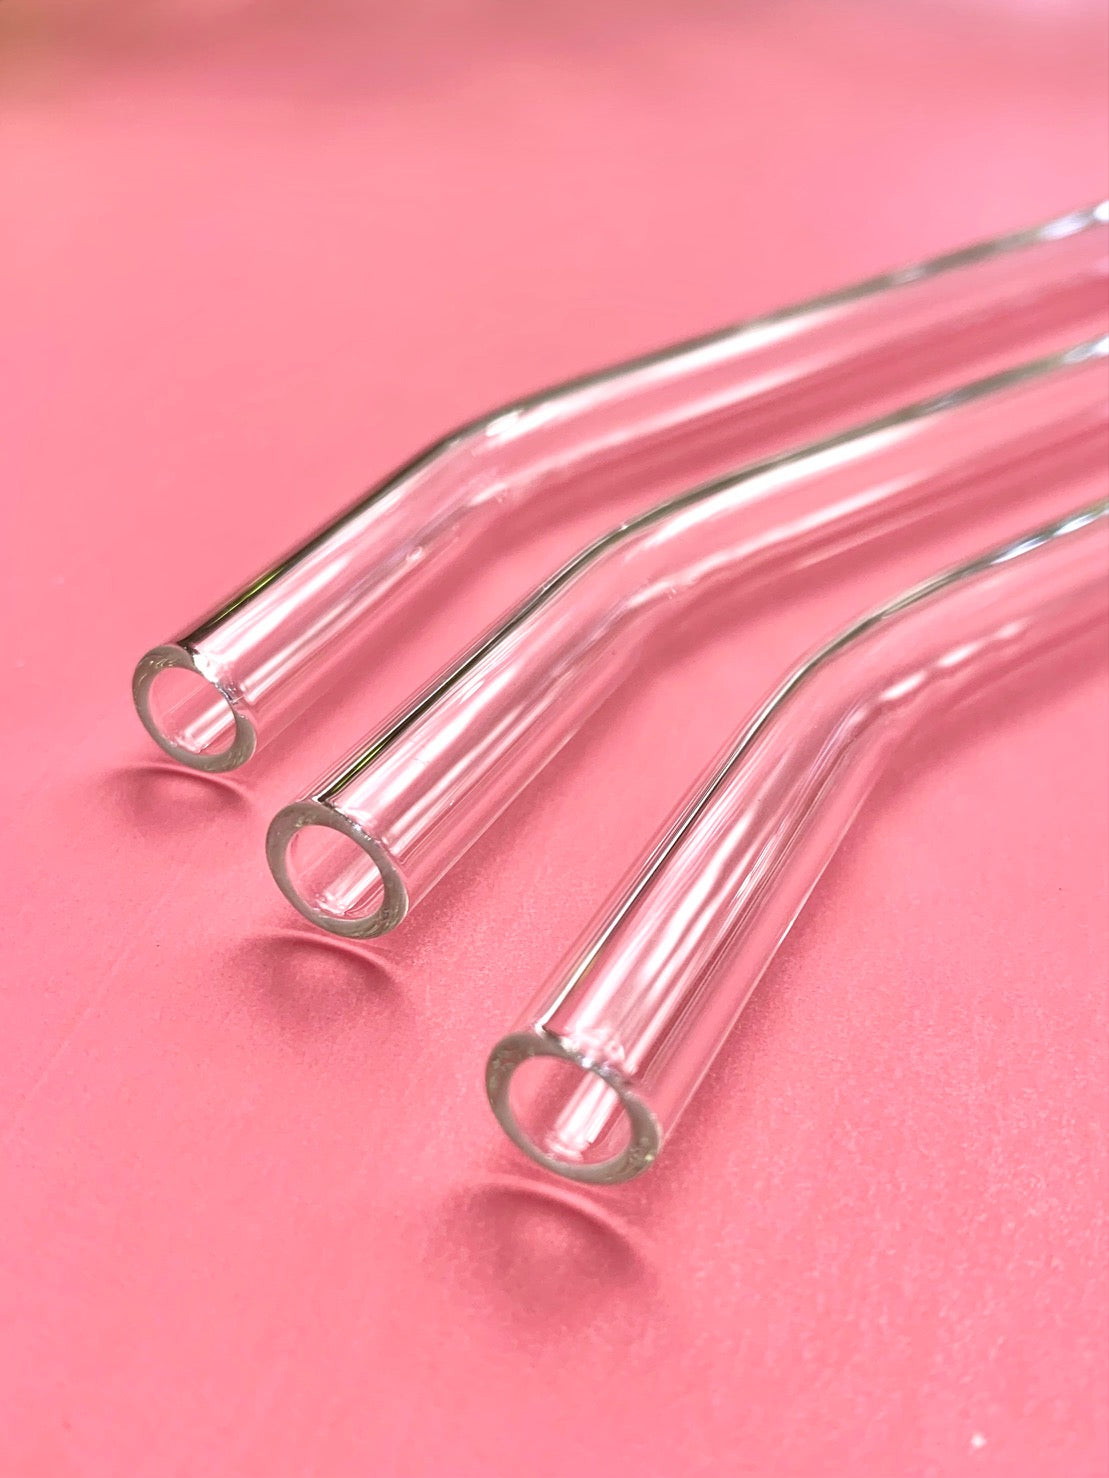 CLEAR BENT GLASS STRAW